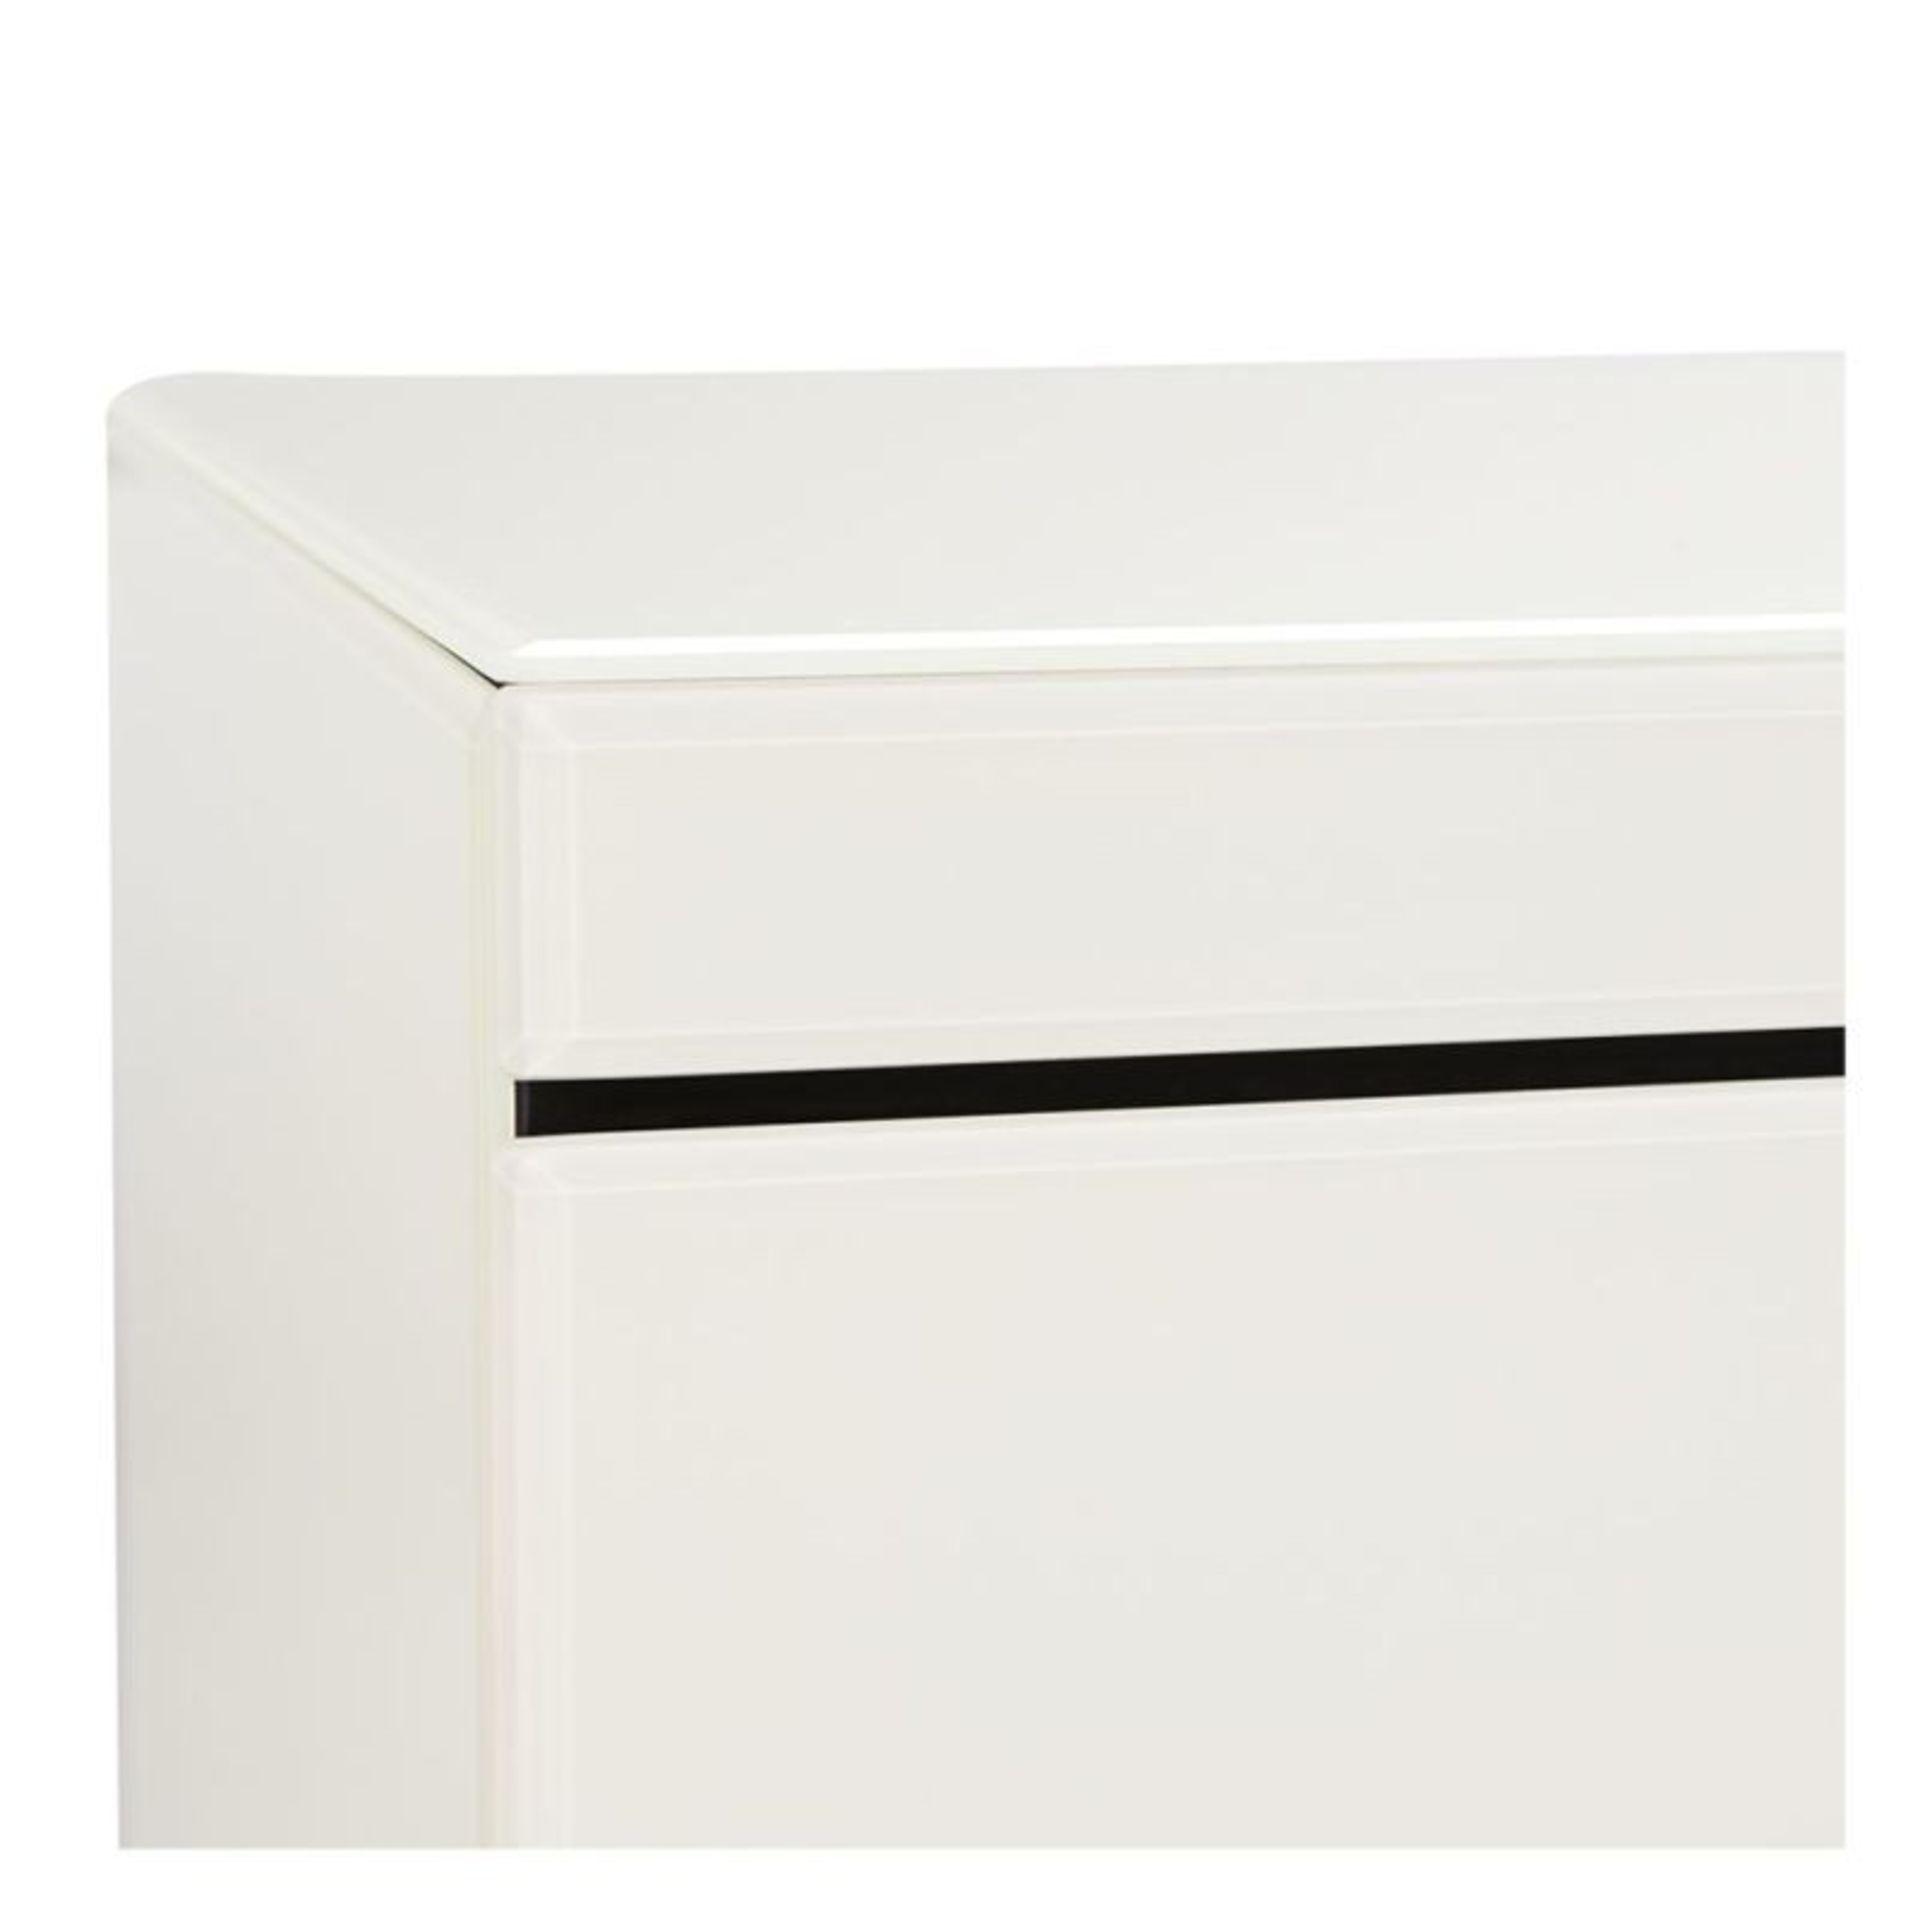 Brand new direct from the manufacturers the shard glass diamond pearl cream 3 + 3 drawer chest, made